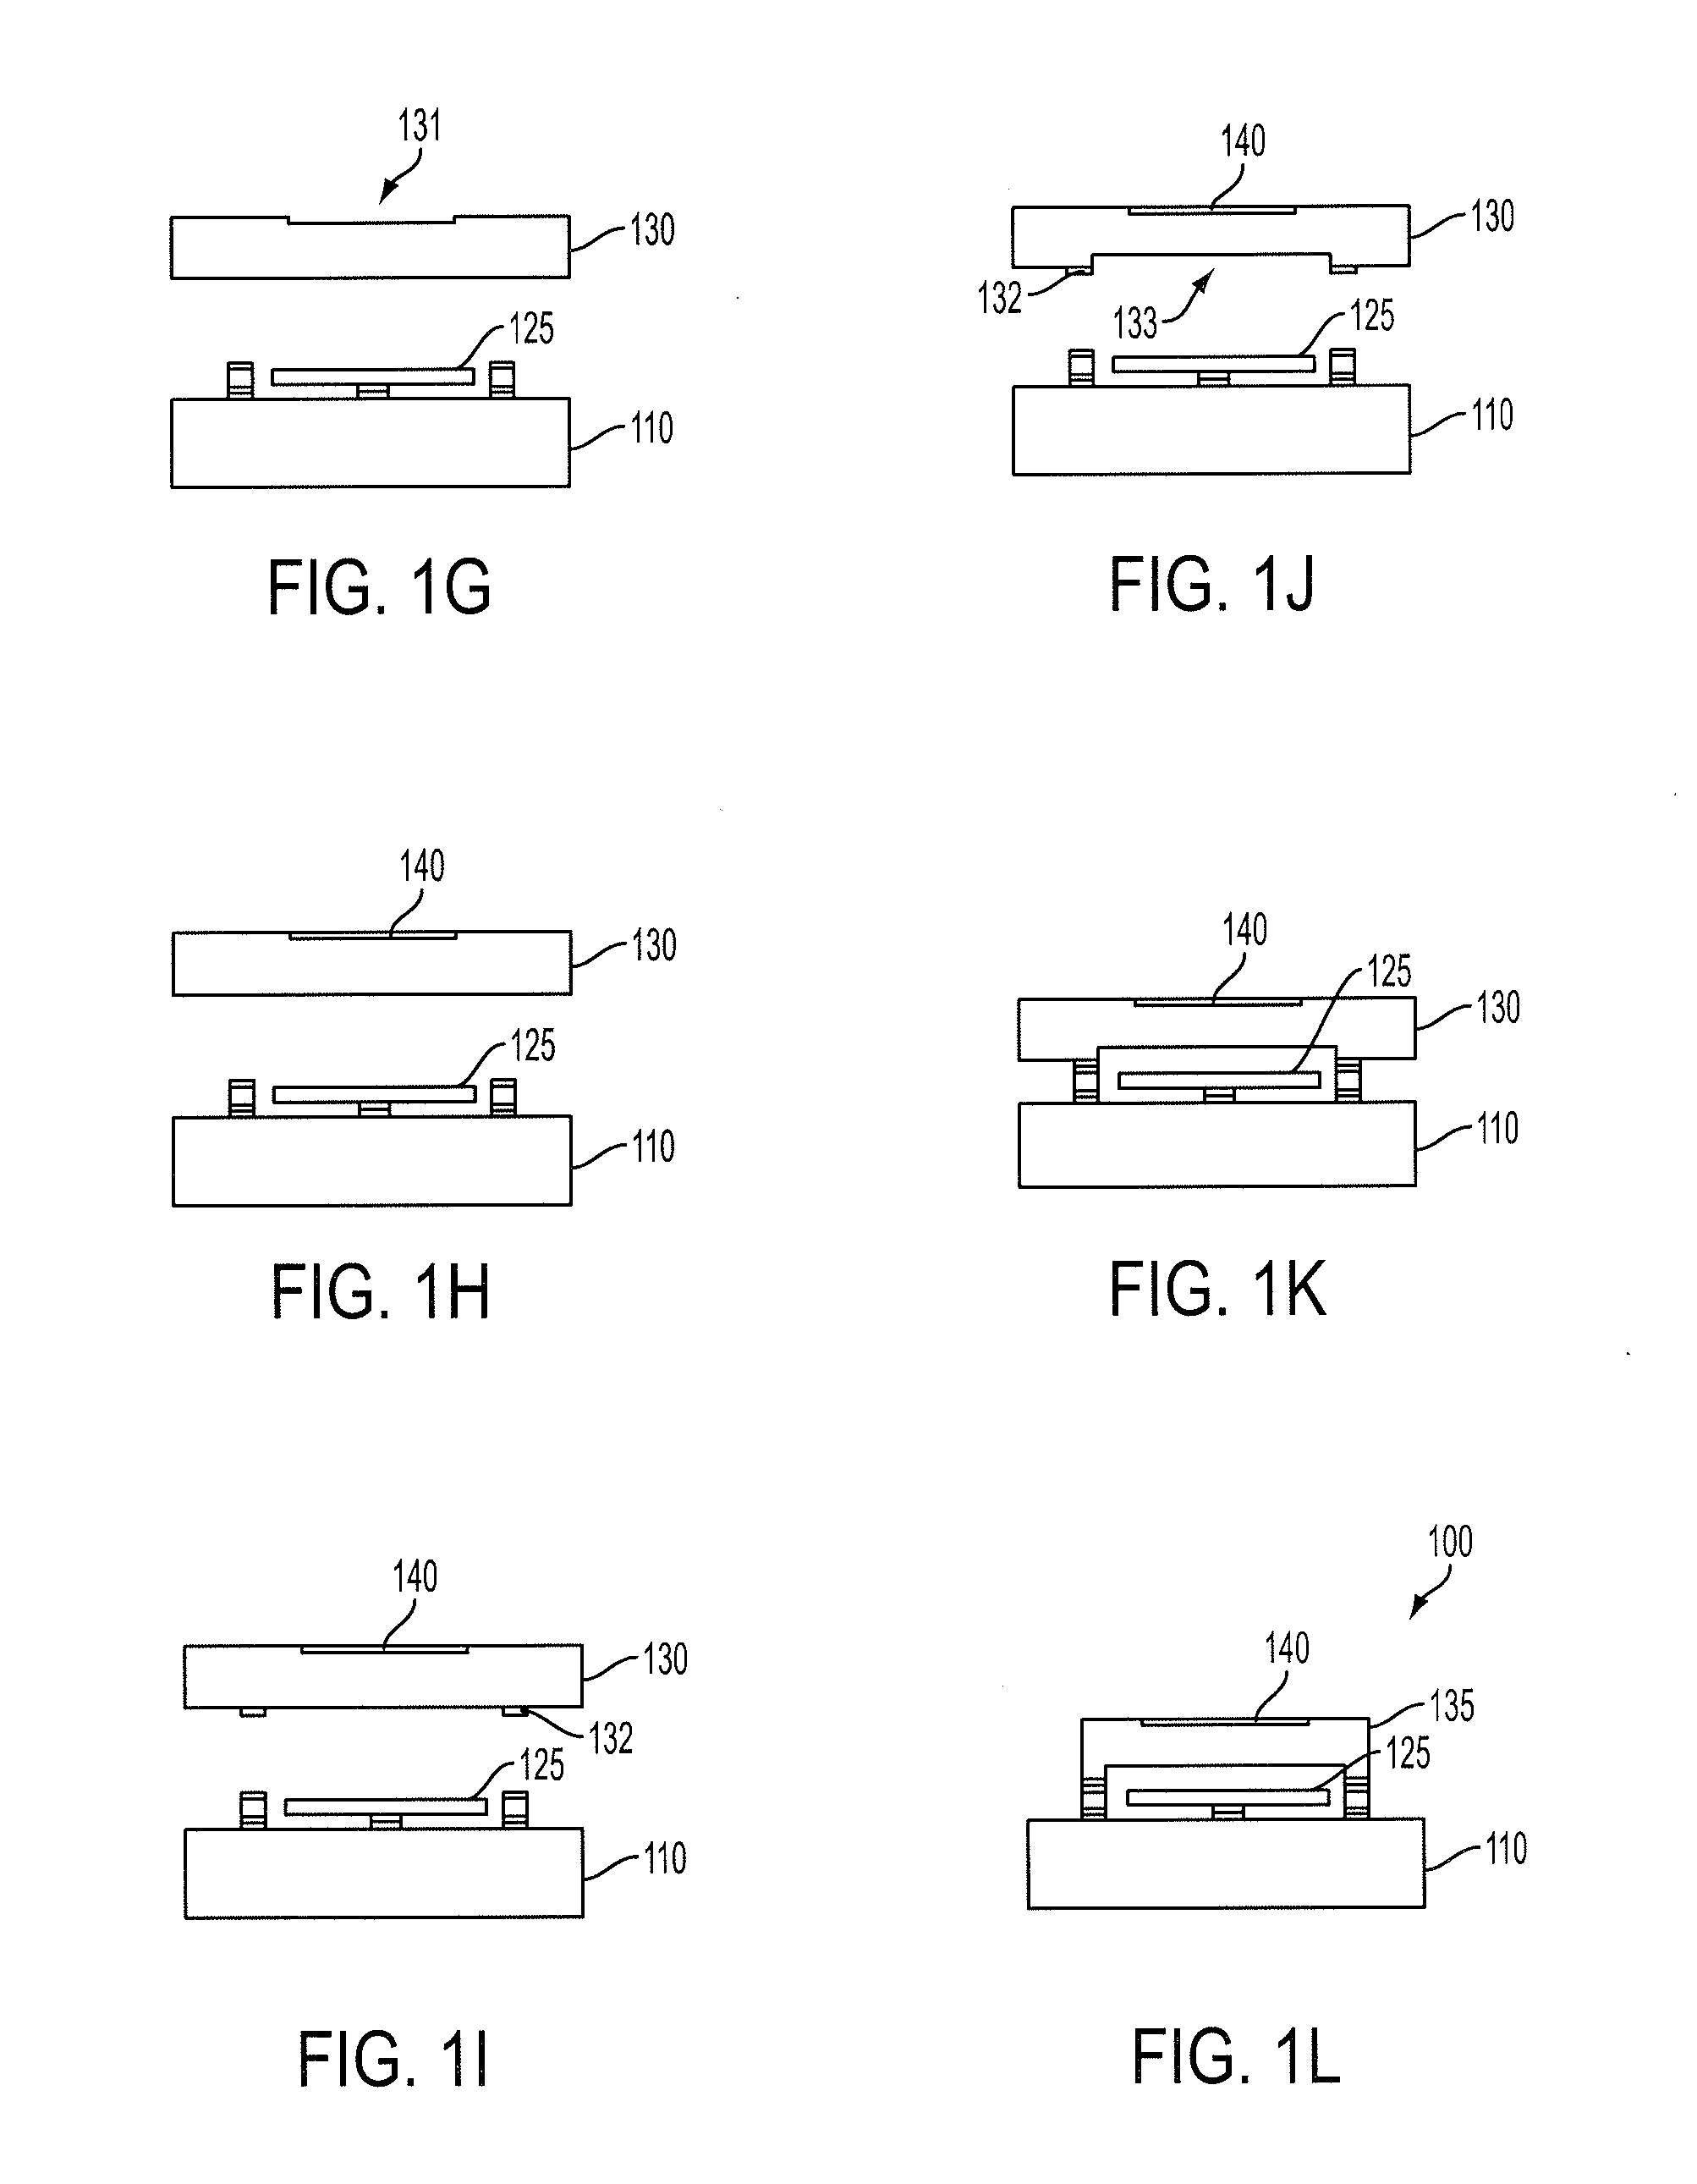 MEMS device with integrated temperature stabilization